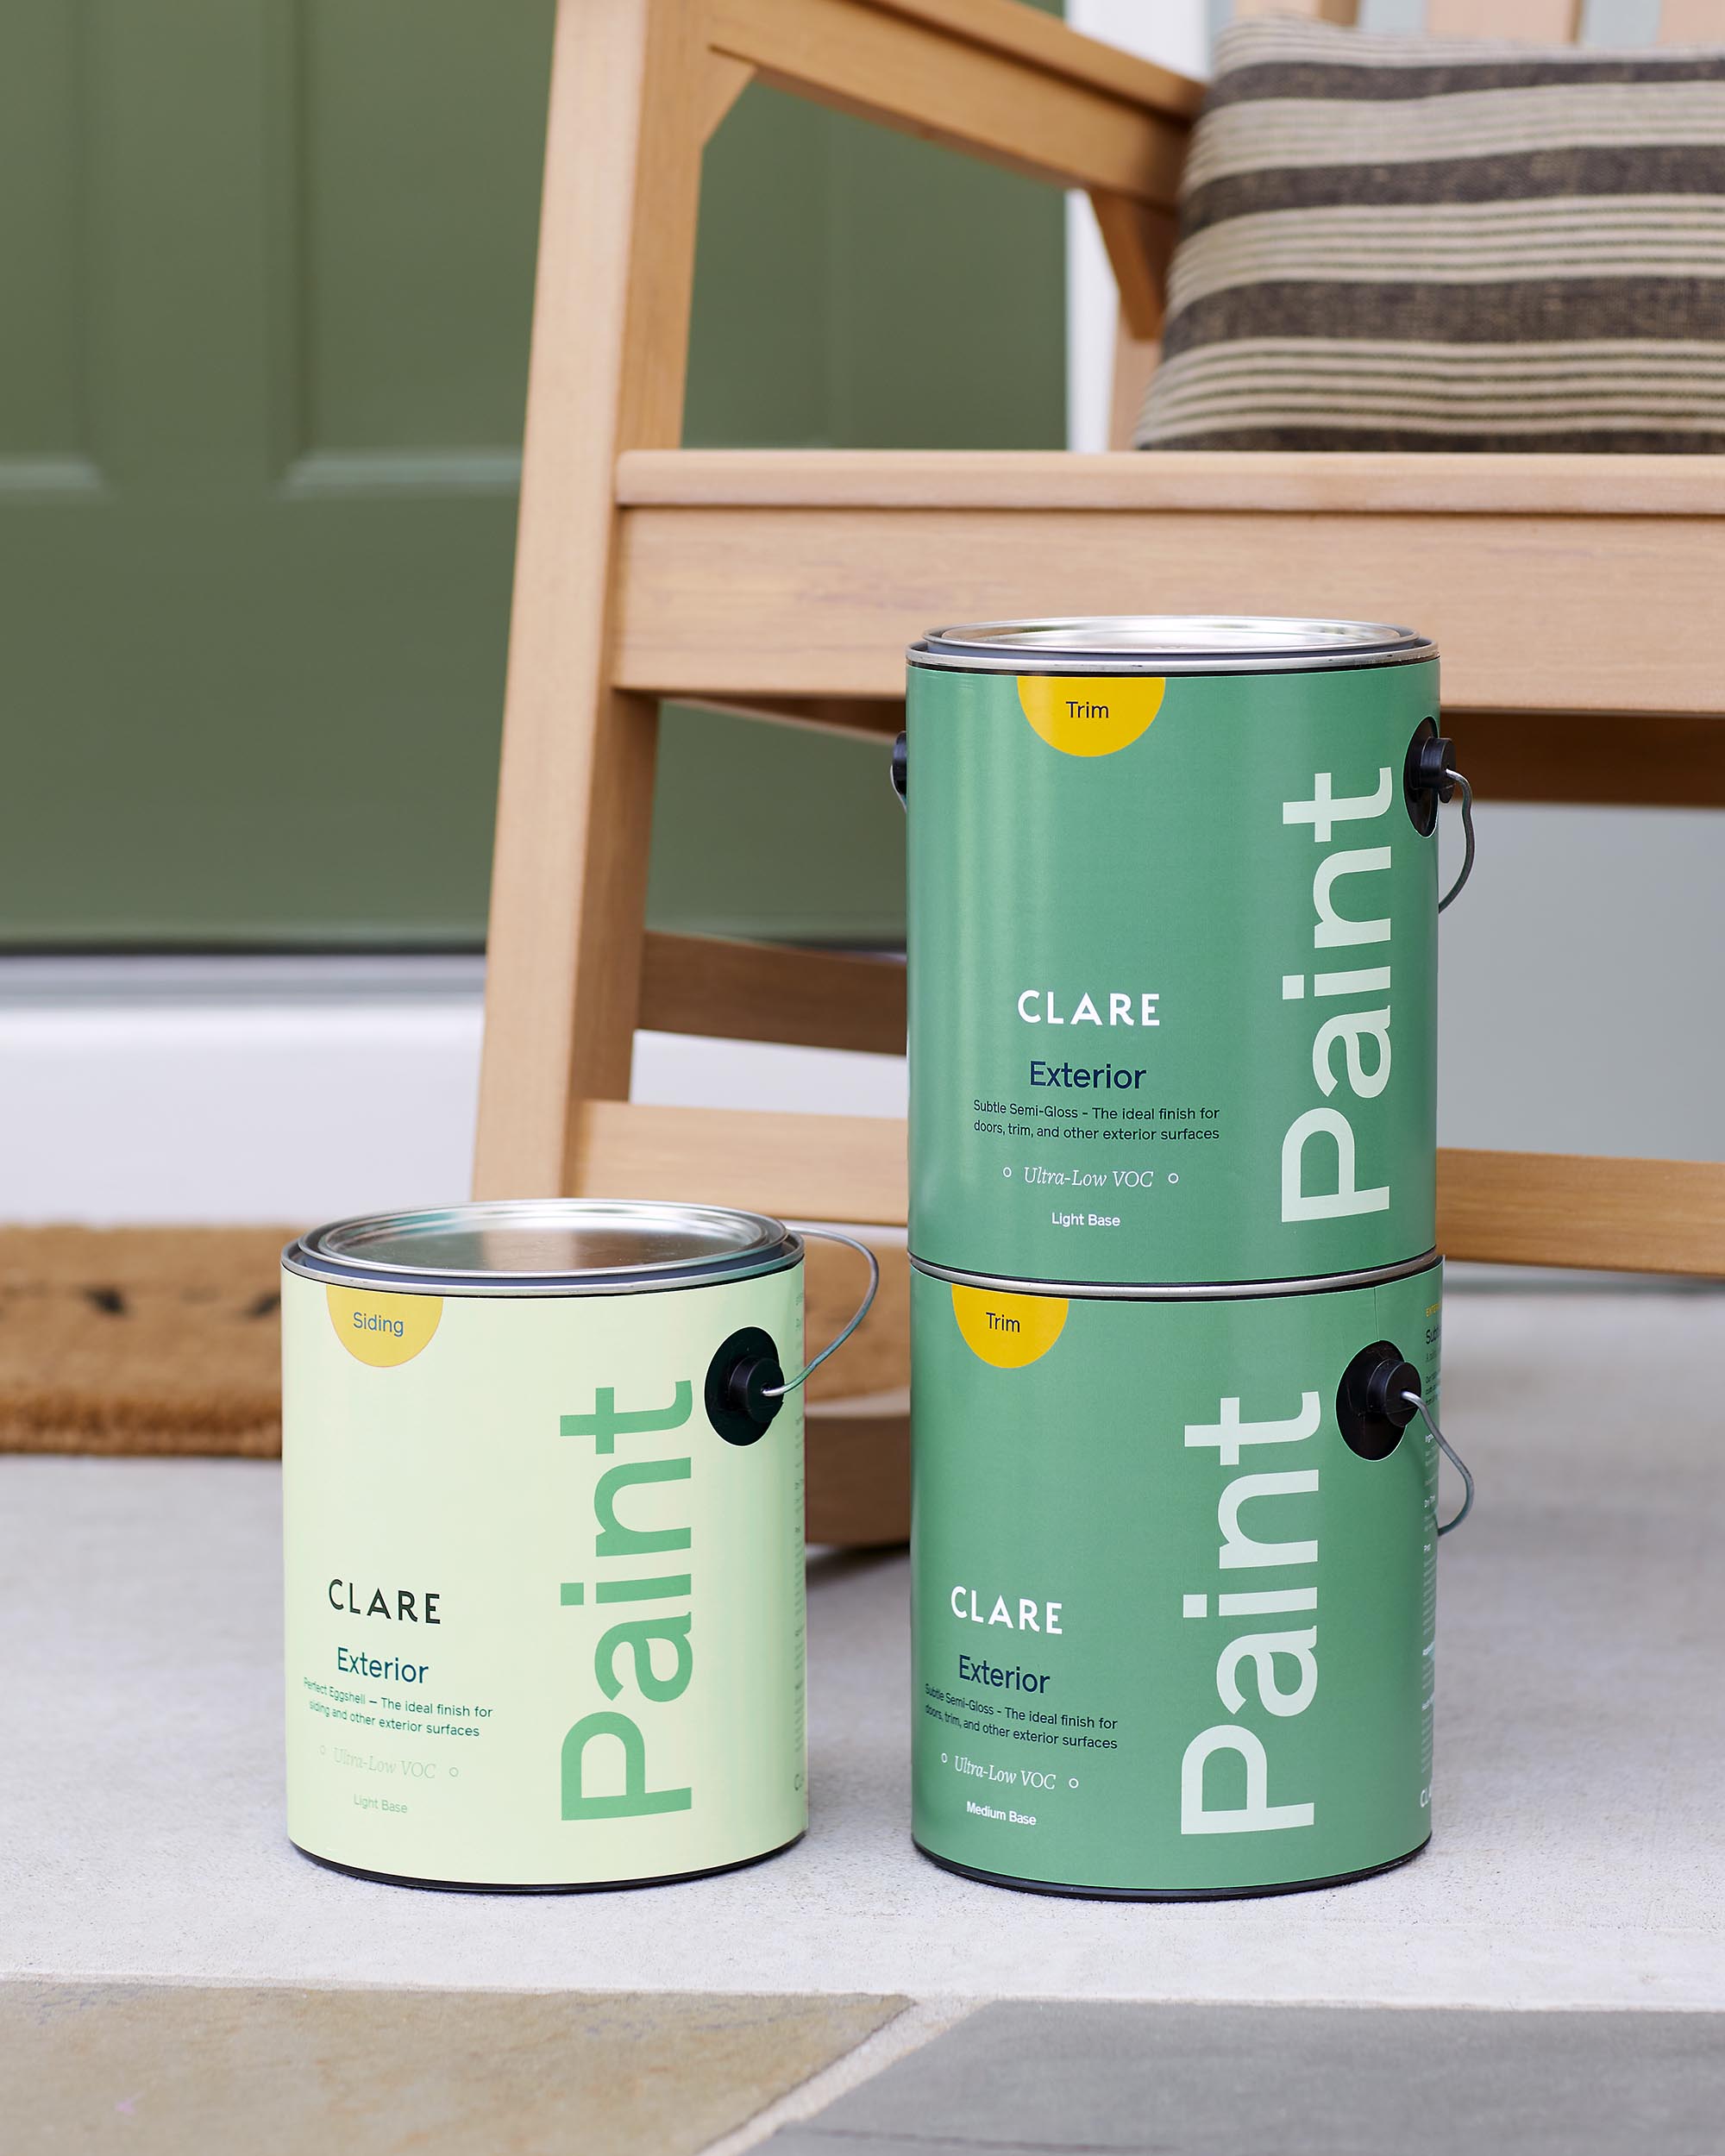 Upgrade your curb appeal with Clare’s exterior paint in the designer curated colors you love. Pick up siding or trim paint for whatever project you need.